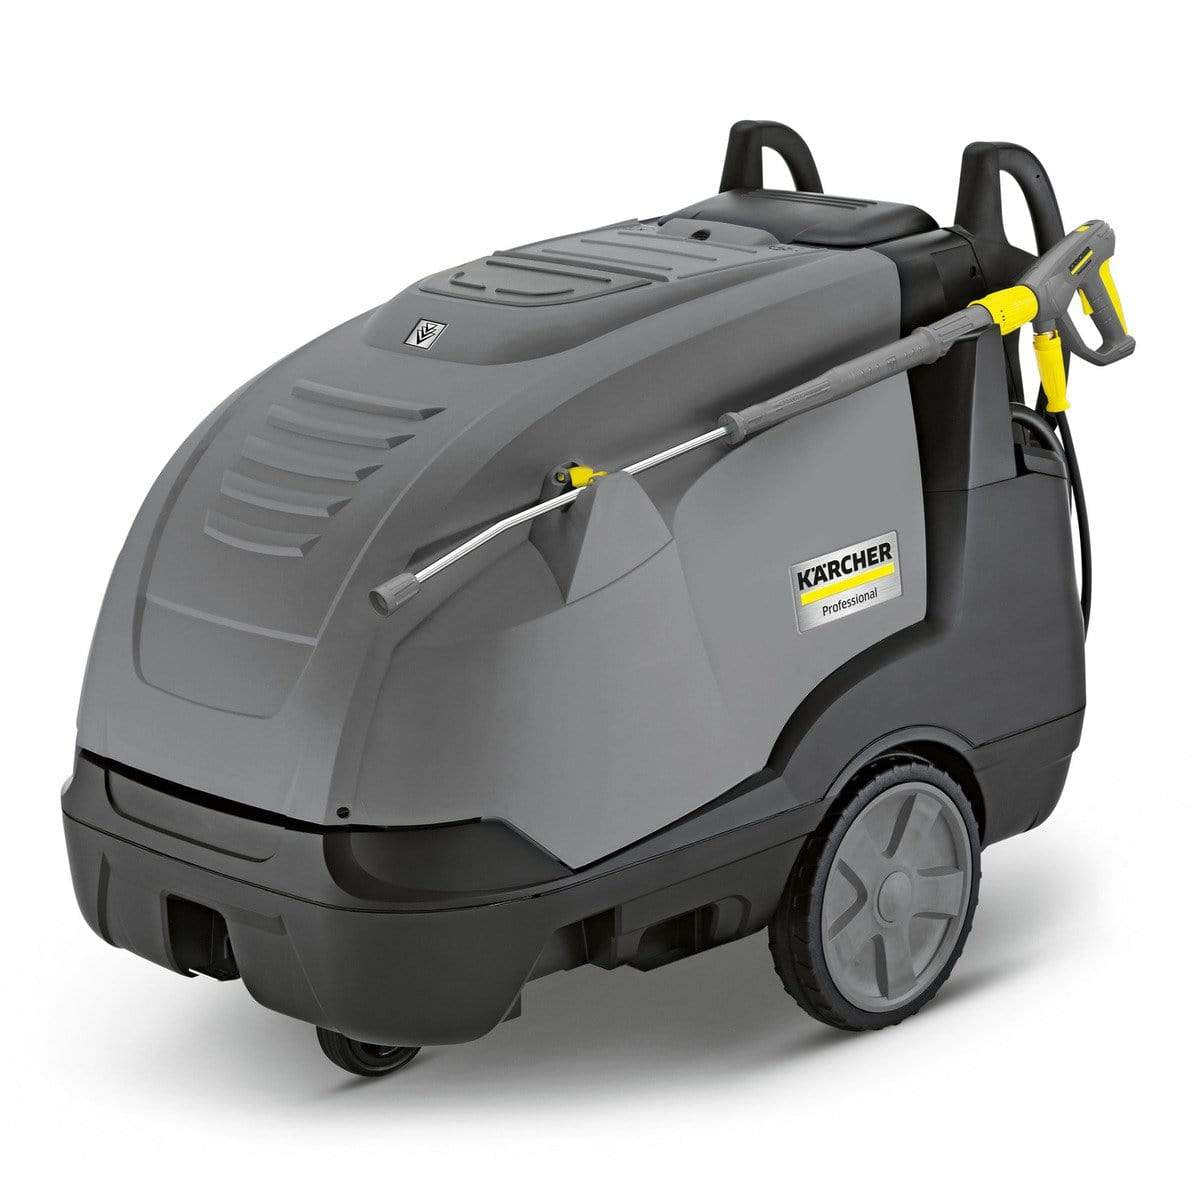 Karcher Hot and Cold High Pressure Washer 160 Bar - HDS-E 8/16-4 M 24 kW | Supply Master | Accra, Ghana Tools Building Steel Engineering Hardware tool